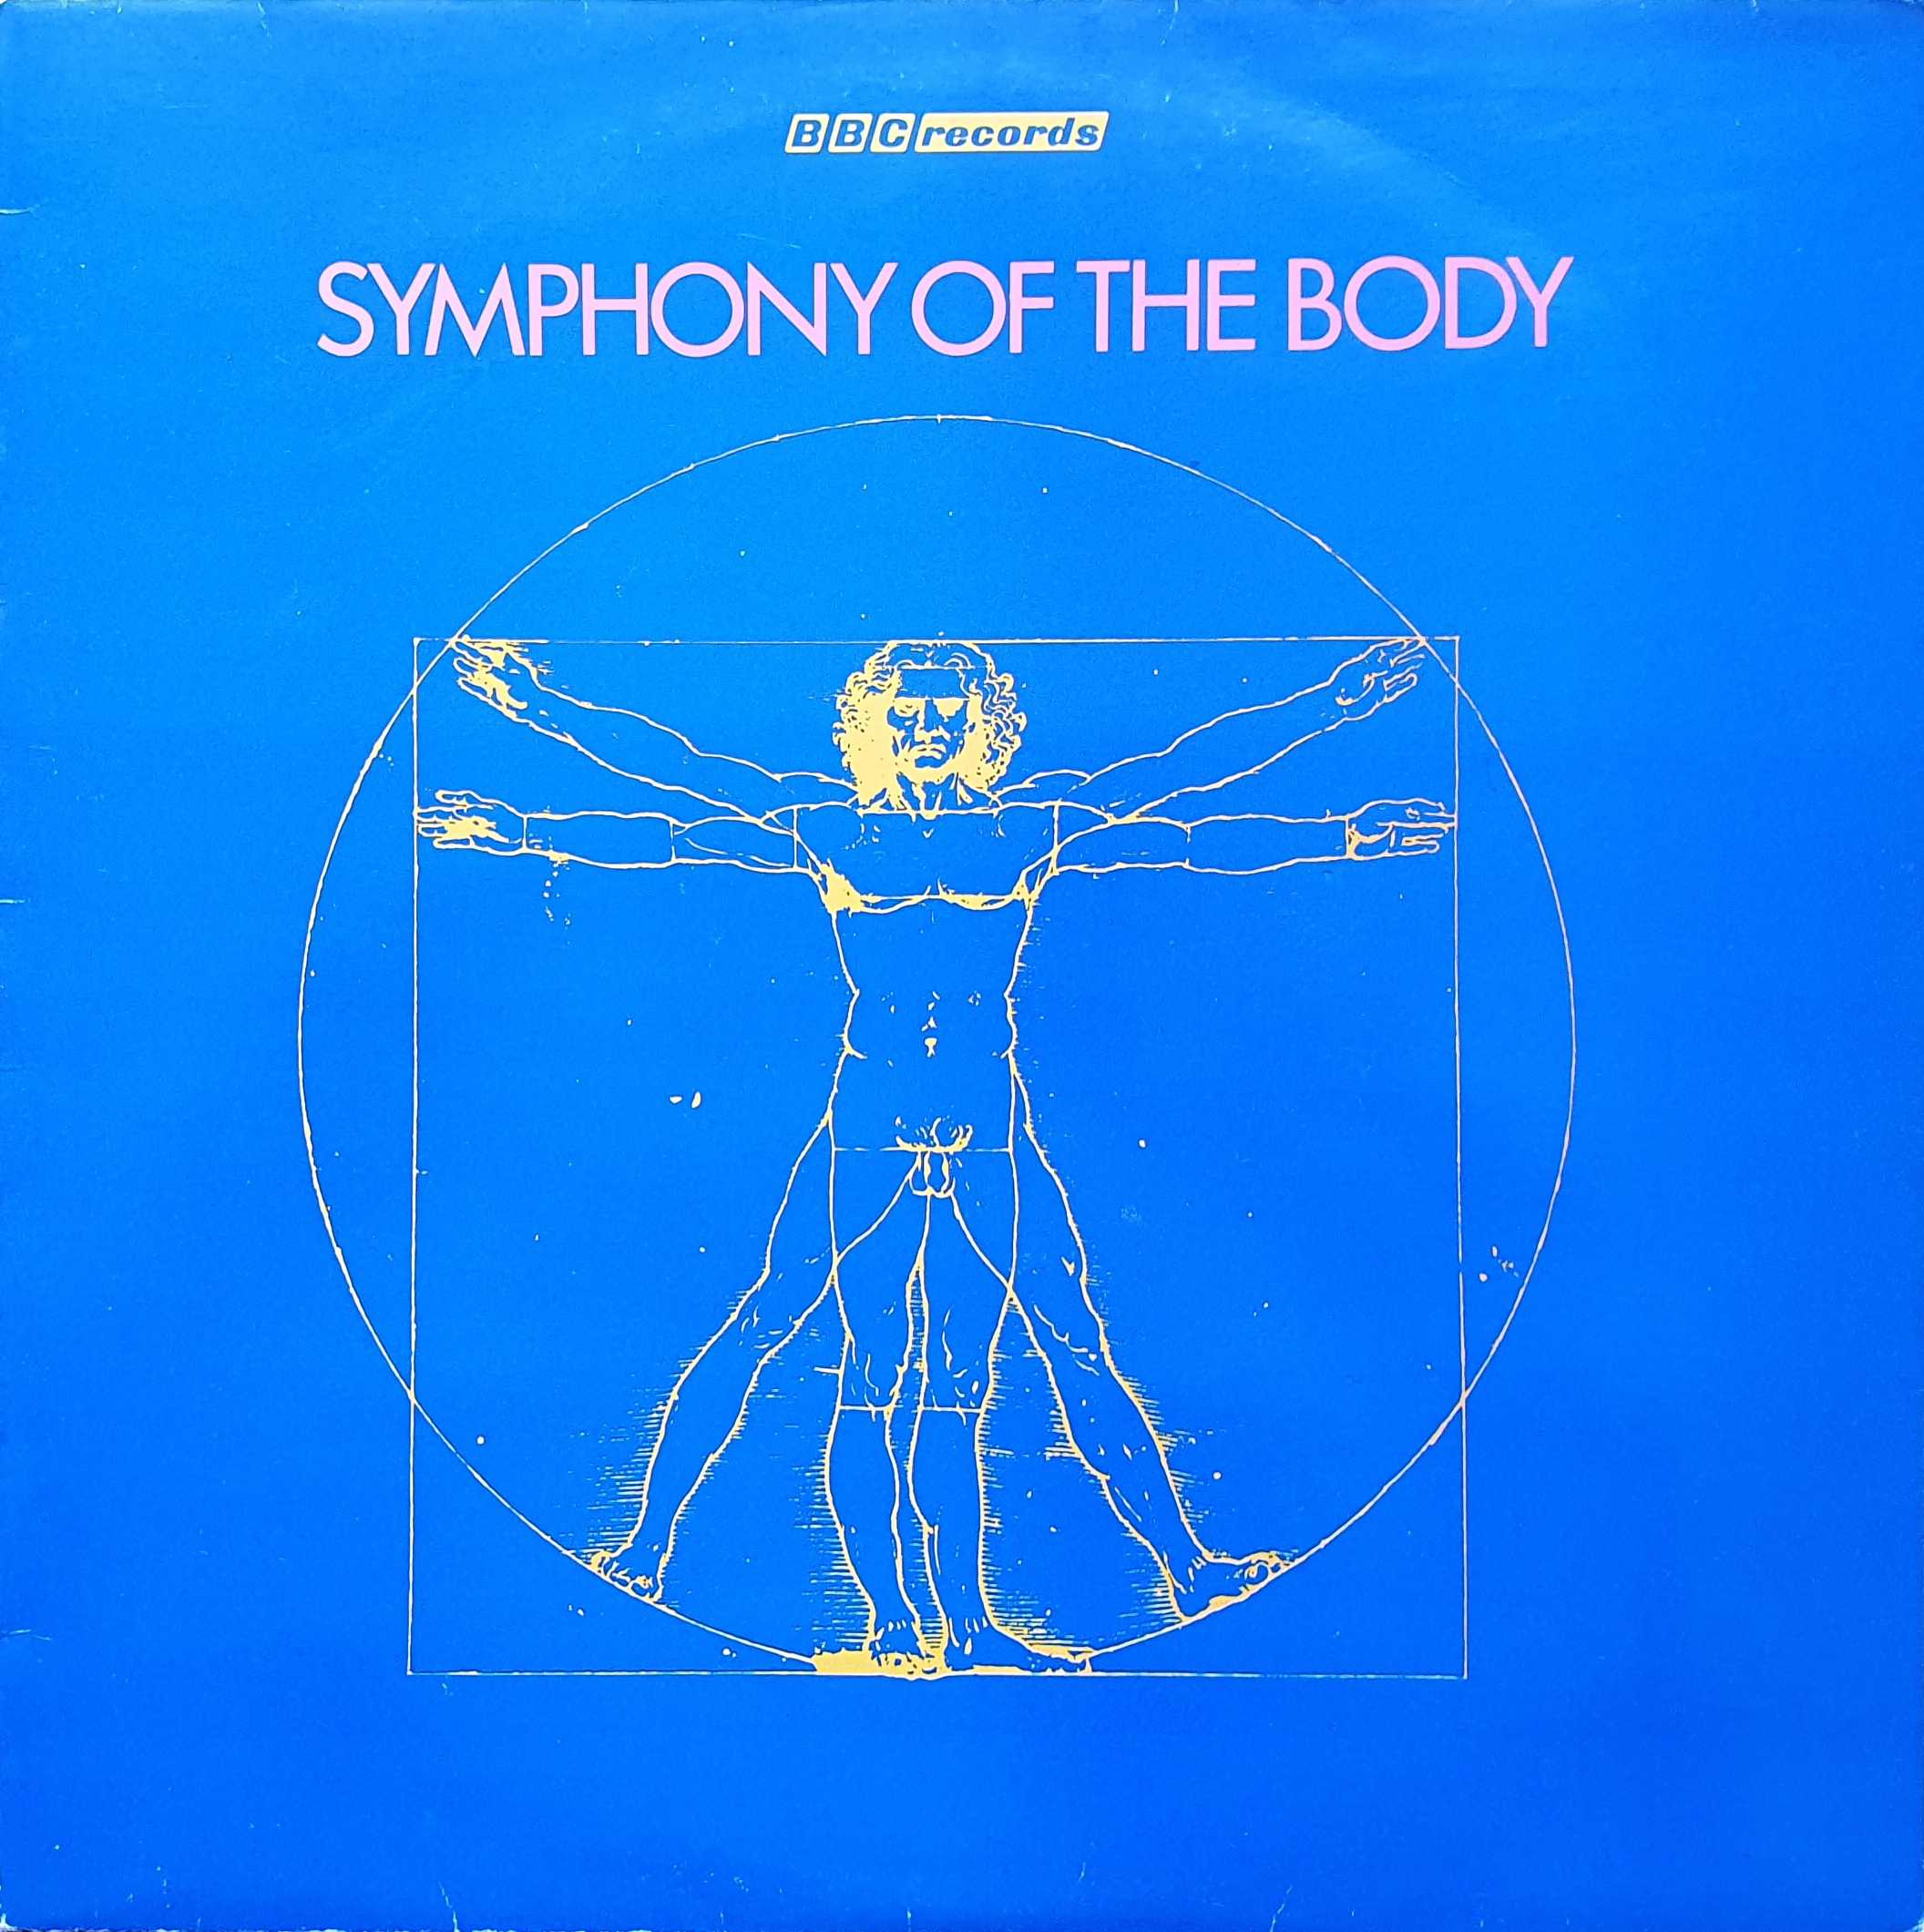 Picture of REC 367 Symphony of the body by artist Anthony Smith from the BBC albums - Records and Tapes library